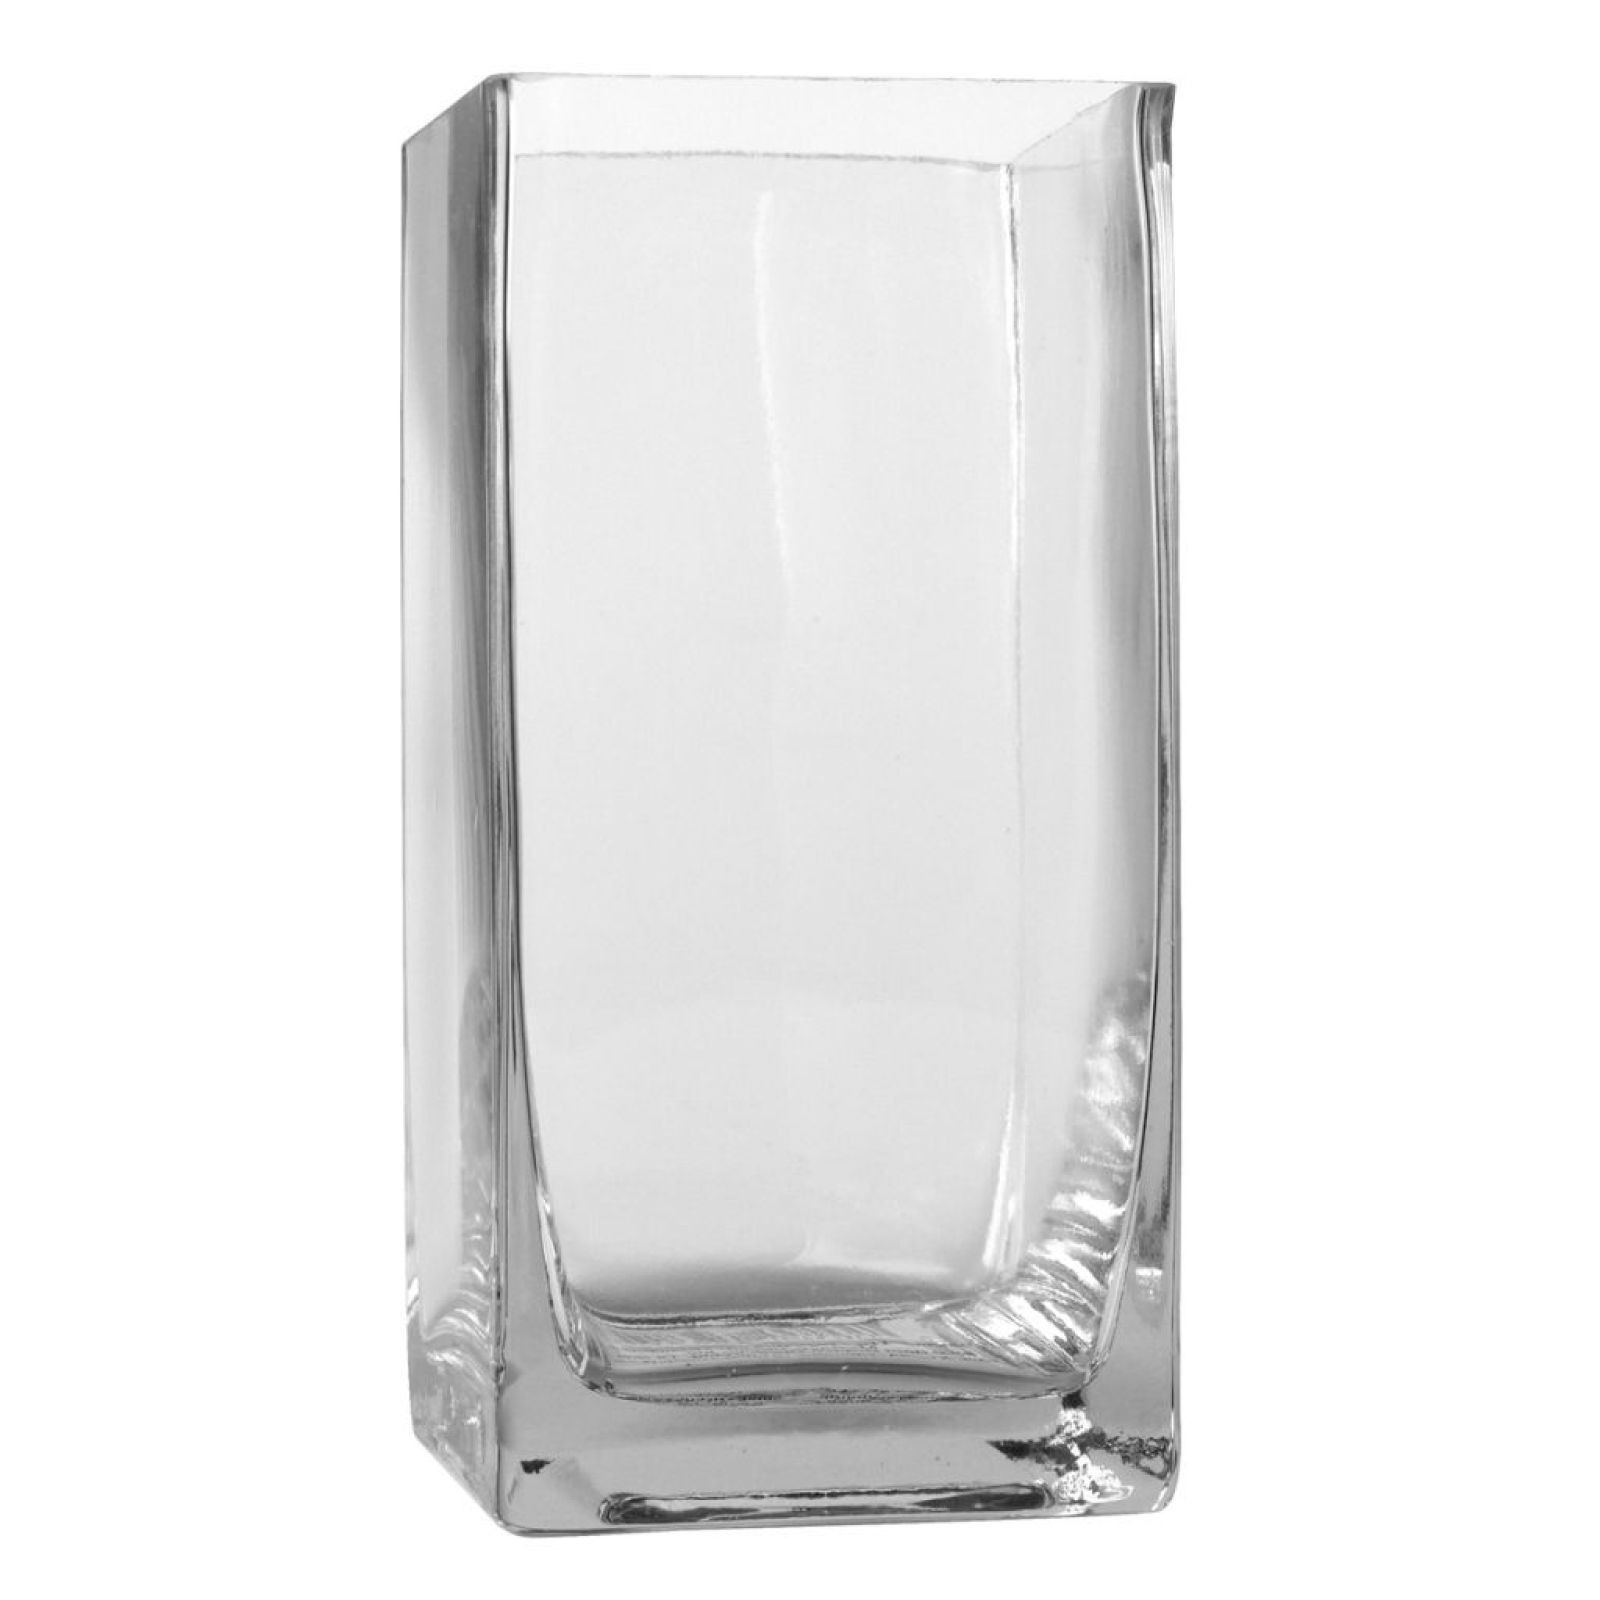 30 Famous 4 Inch Glass Cube Vase 2024 free download 4 inch glass cube vase of ashland tall cube glass vase cube and glass intended for ashlanda tall cube glass vase 6